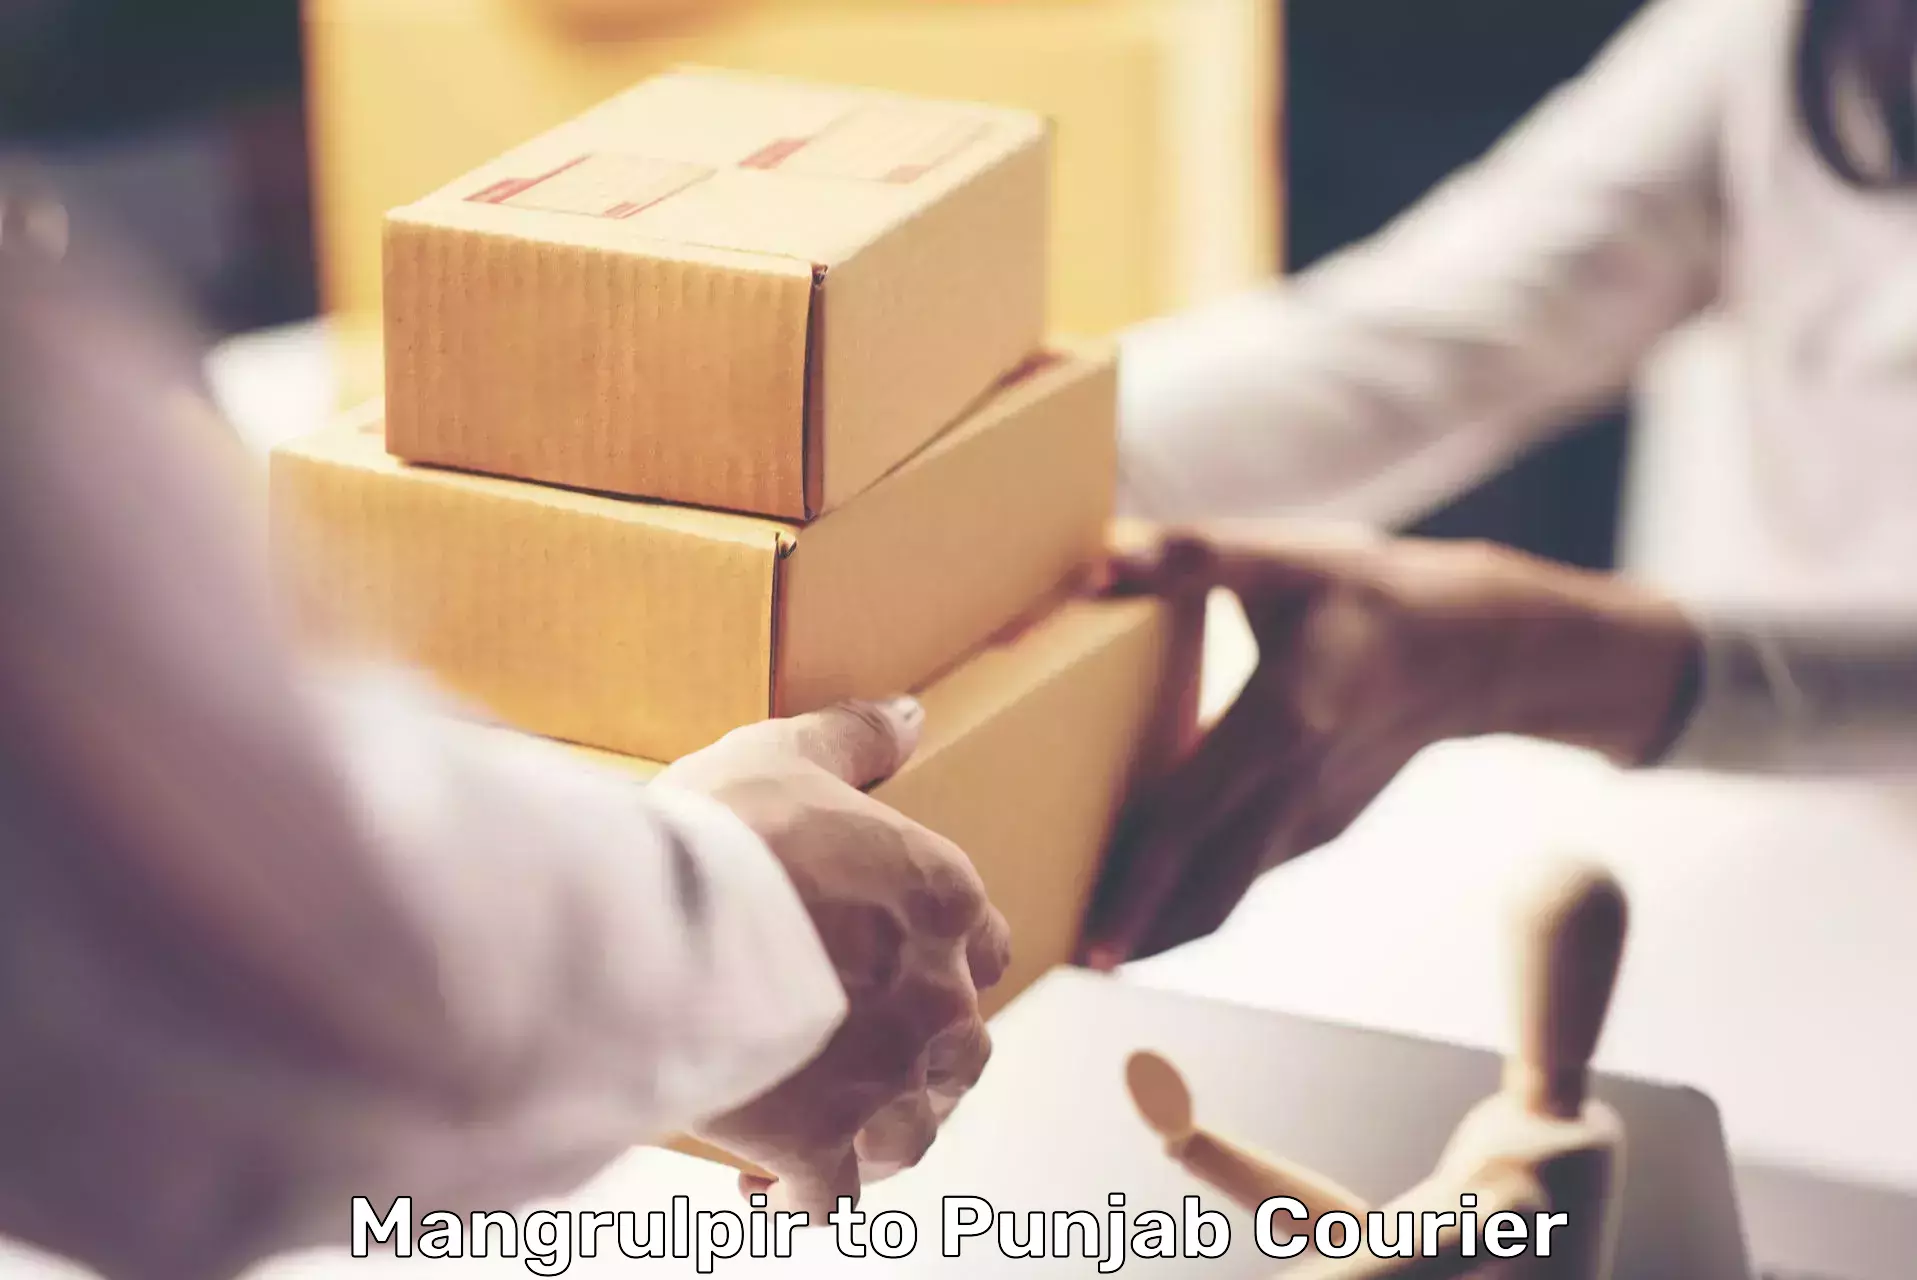 24/7 shipping services Mangrulpir to Mohali